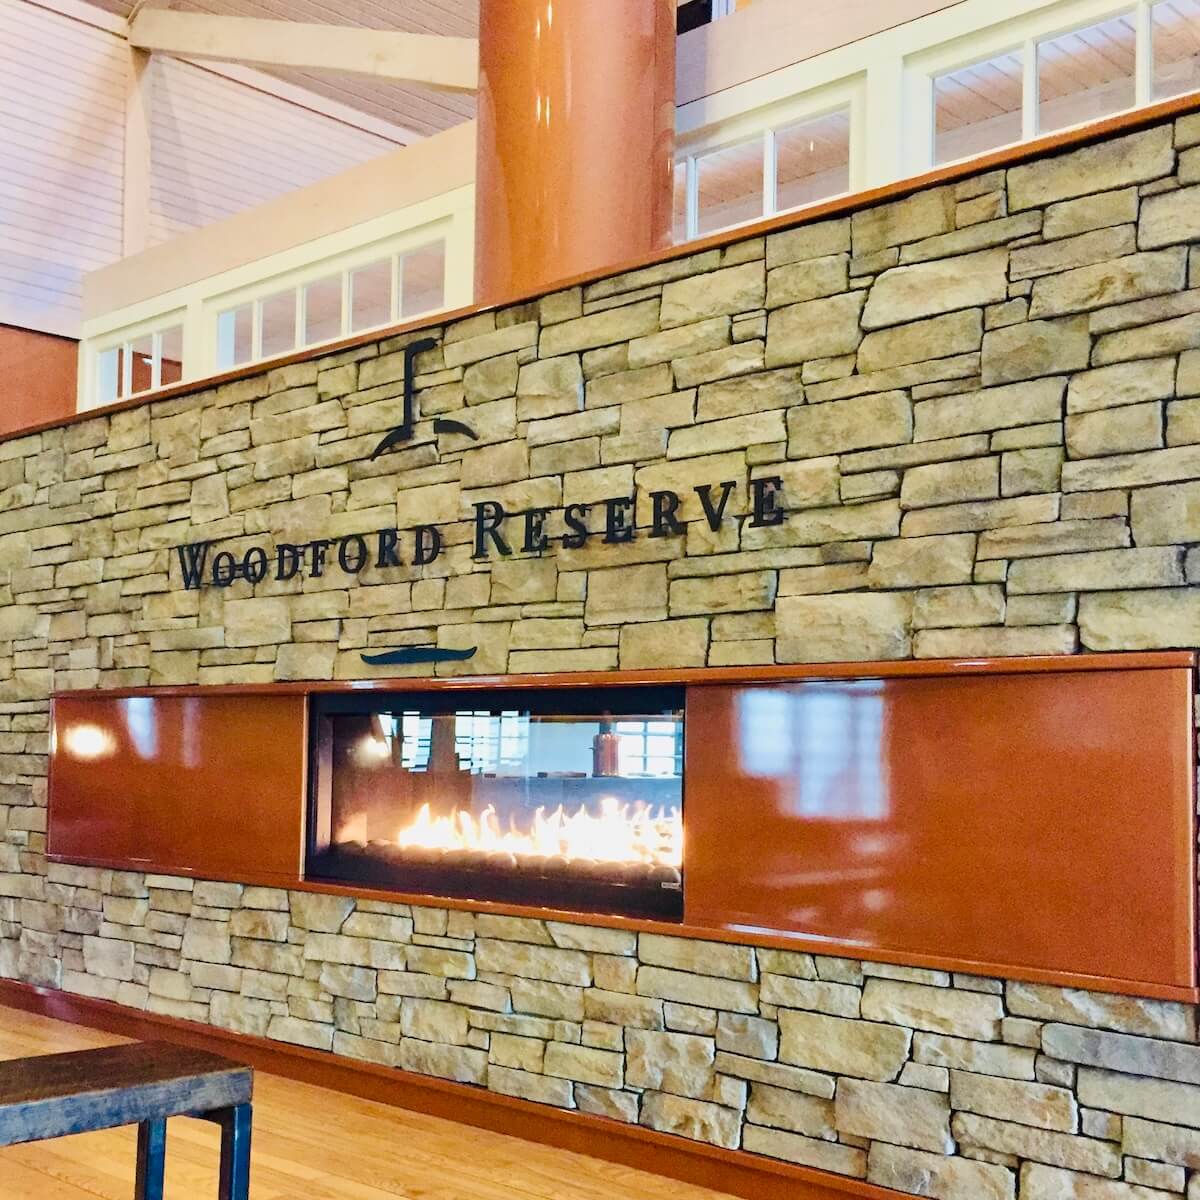 The see through fireplace inside the stone wall of the woodford reserve distillery visitor's center